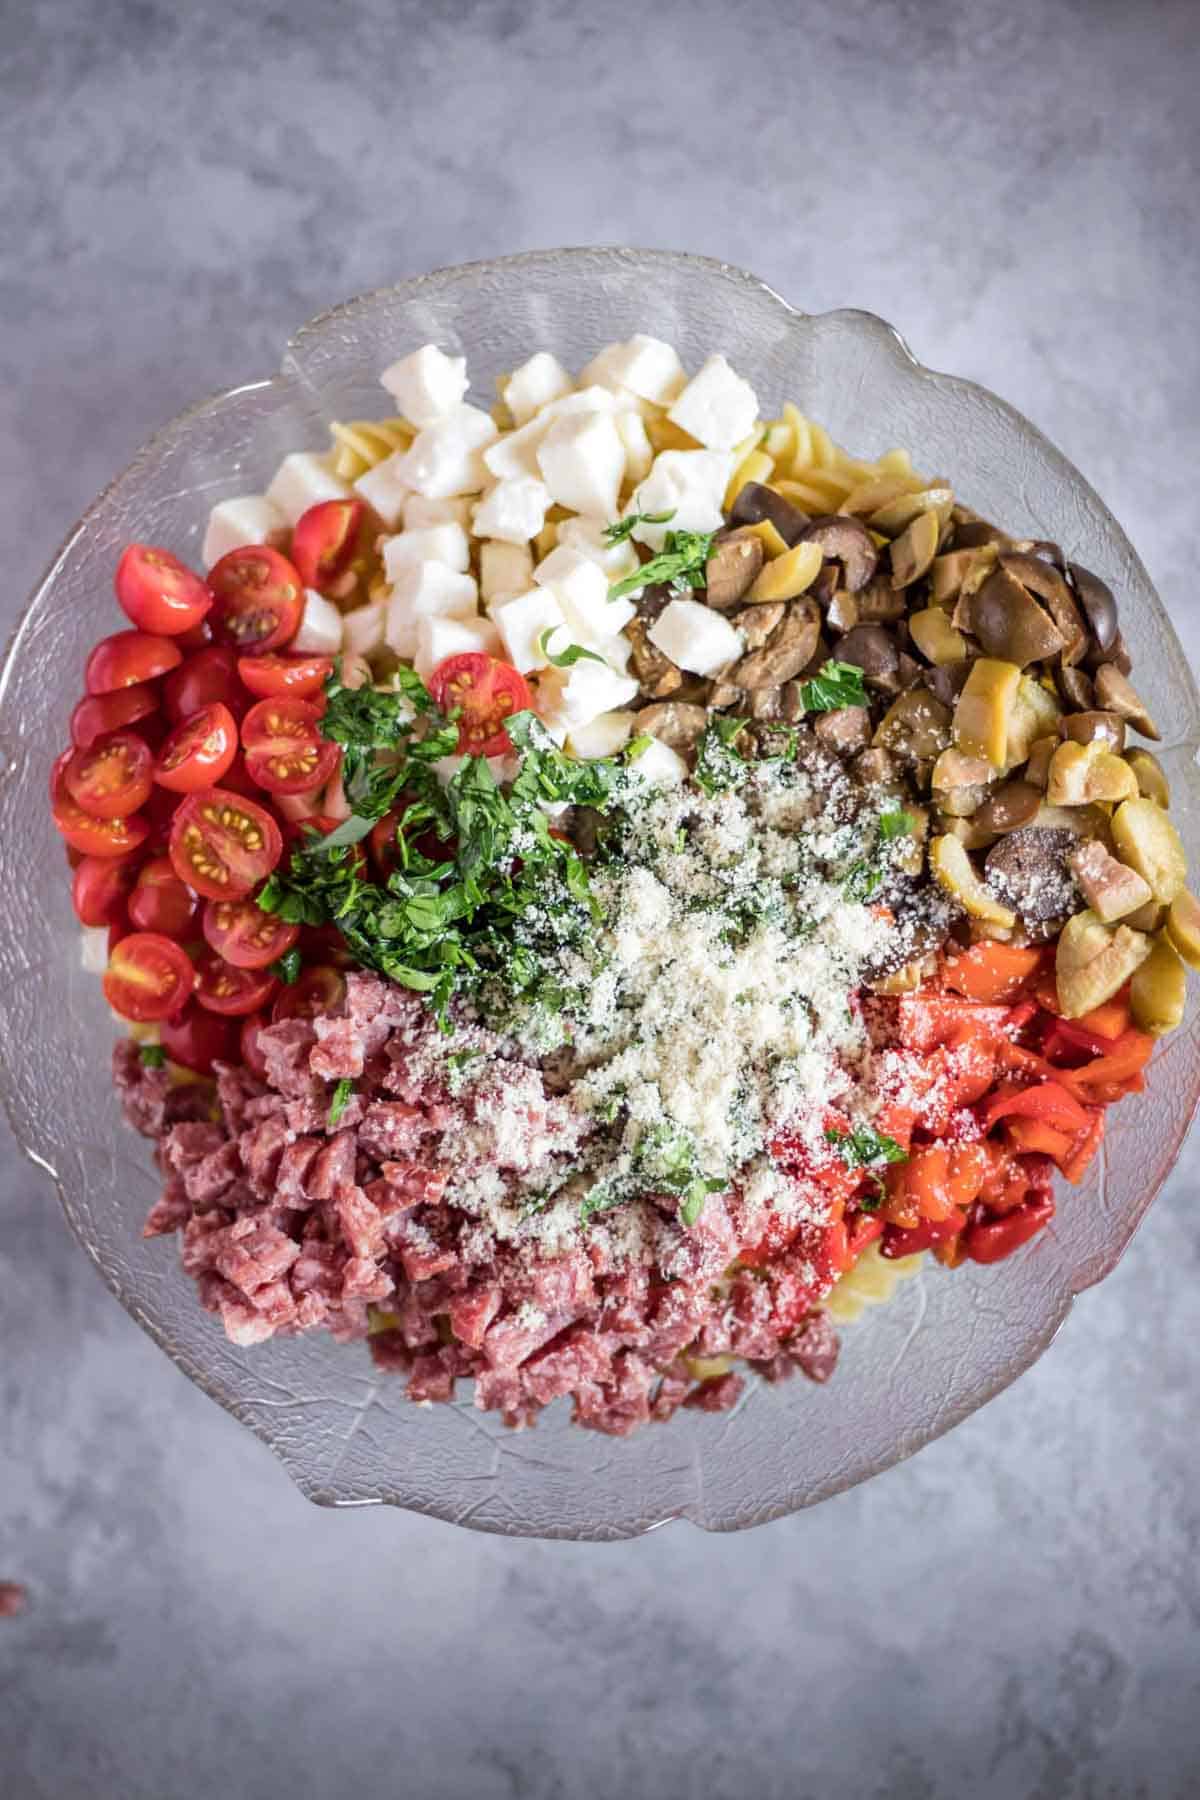 A salad bowl with gluten-free rotini pasta, cherry tomatoes, mozzarella balls, olives, roasted red pepper, salami, parsley and parmesan cheese.